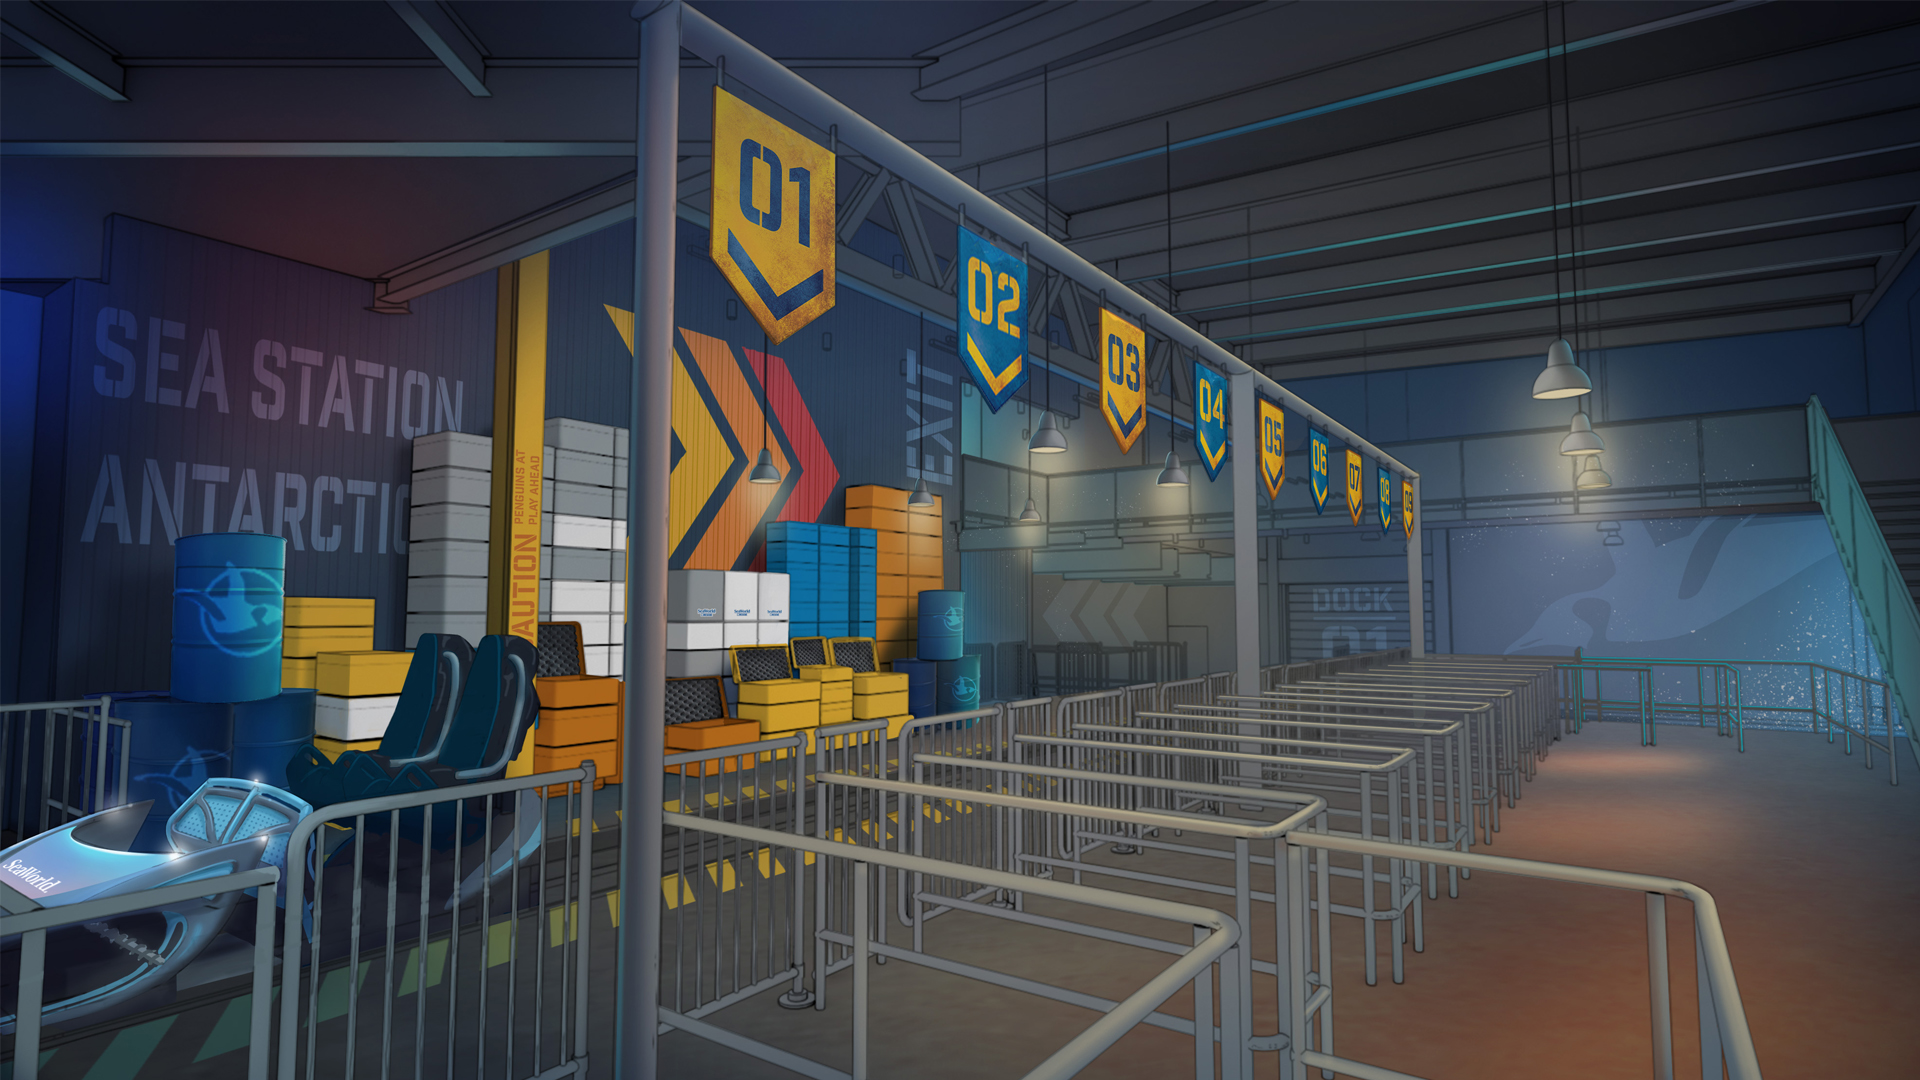 loading area for the coaster with blue and yellow banners